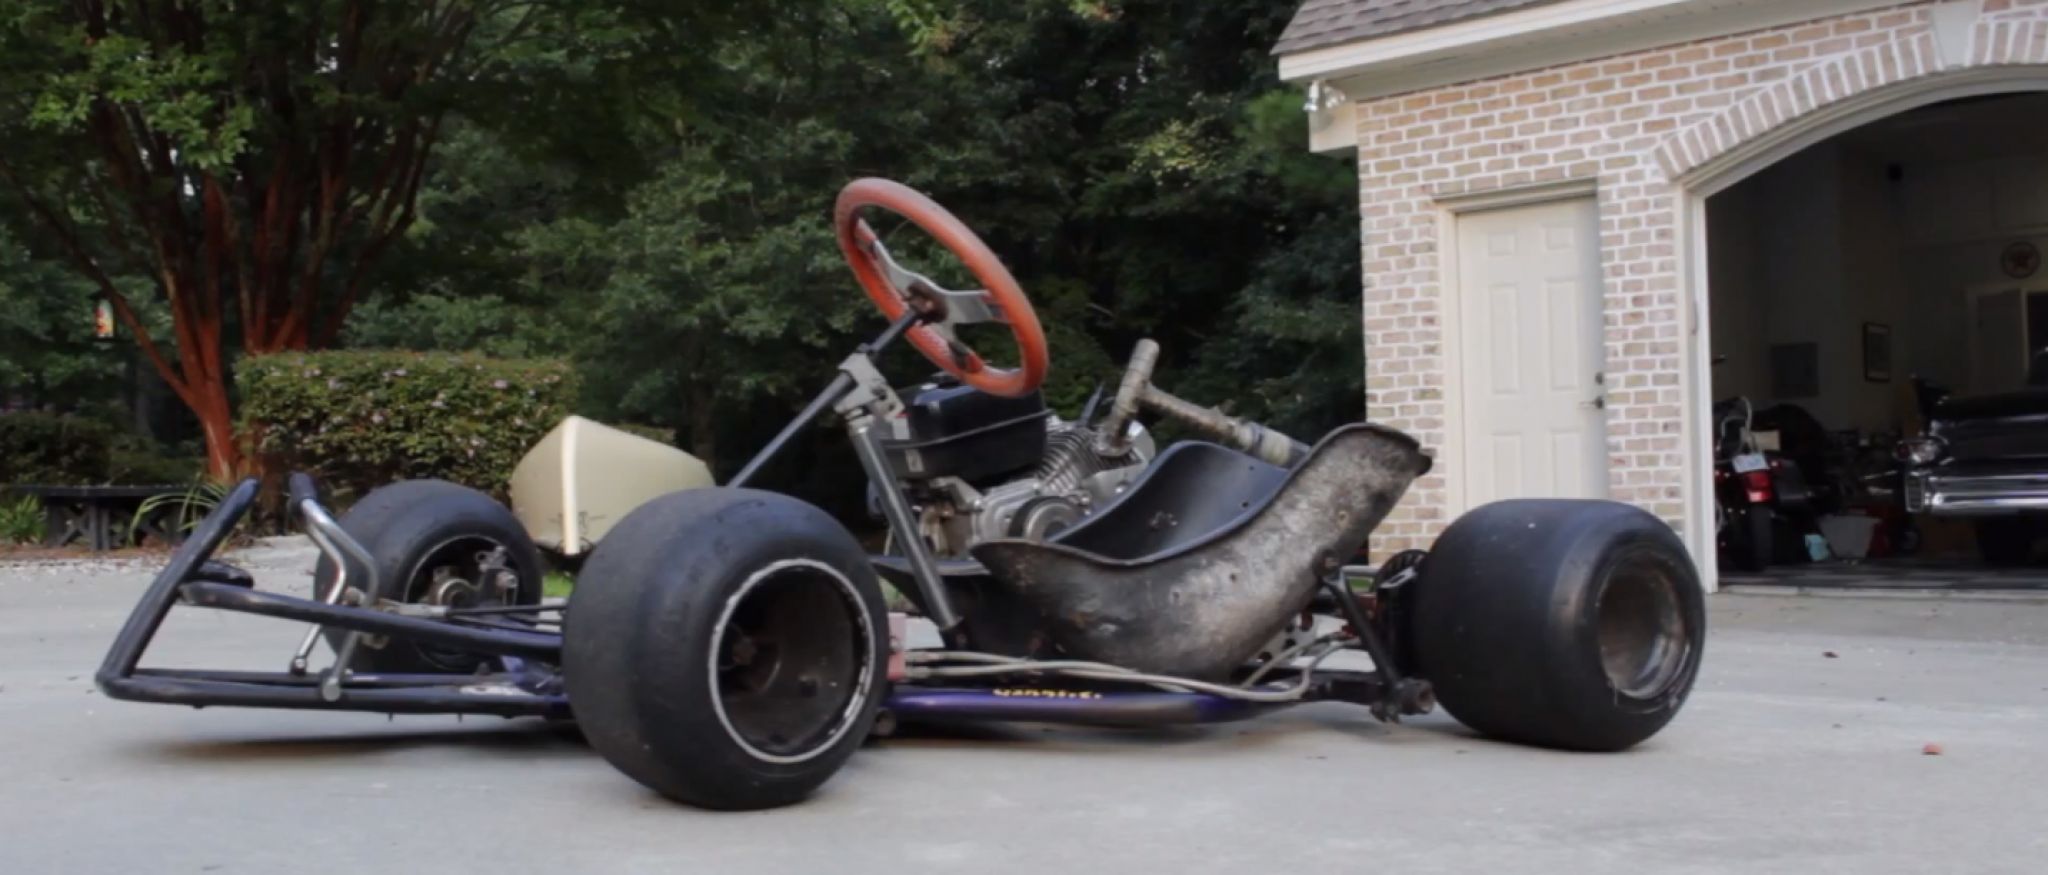 9 Reasons To Buy An Old Go Kart My Life At Speed